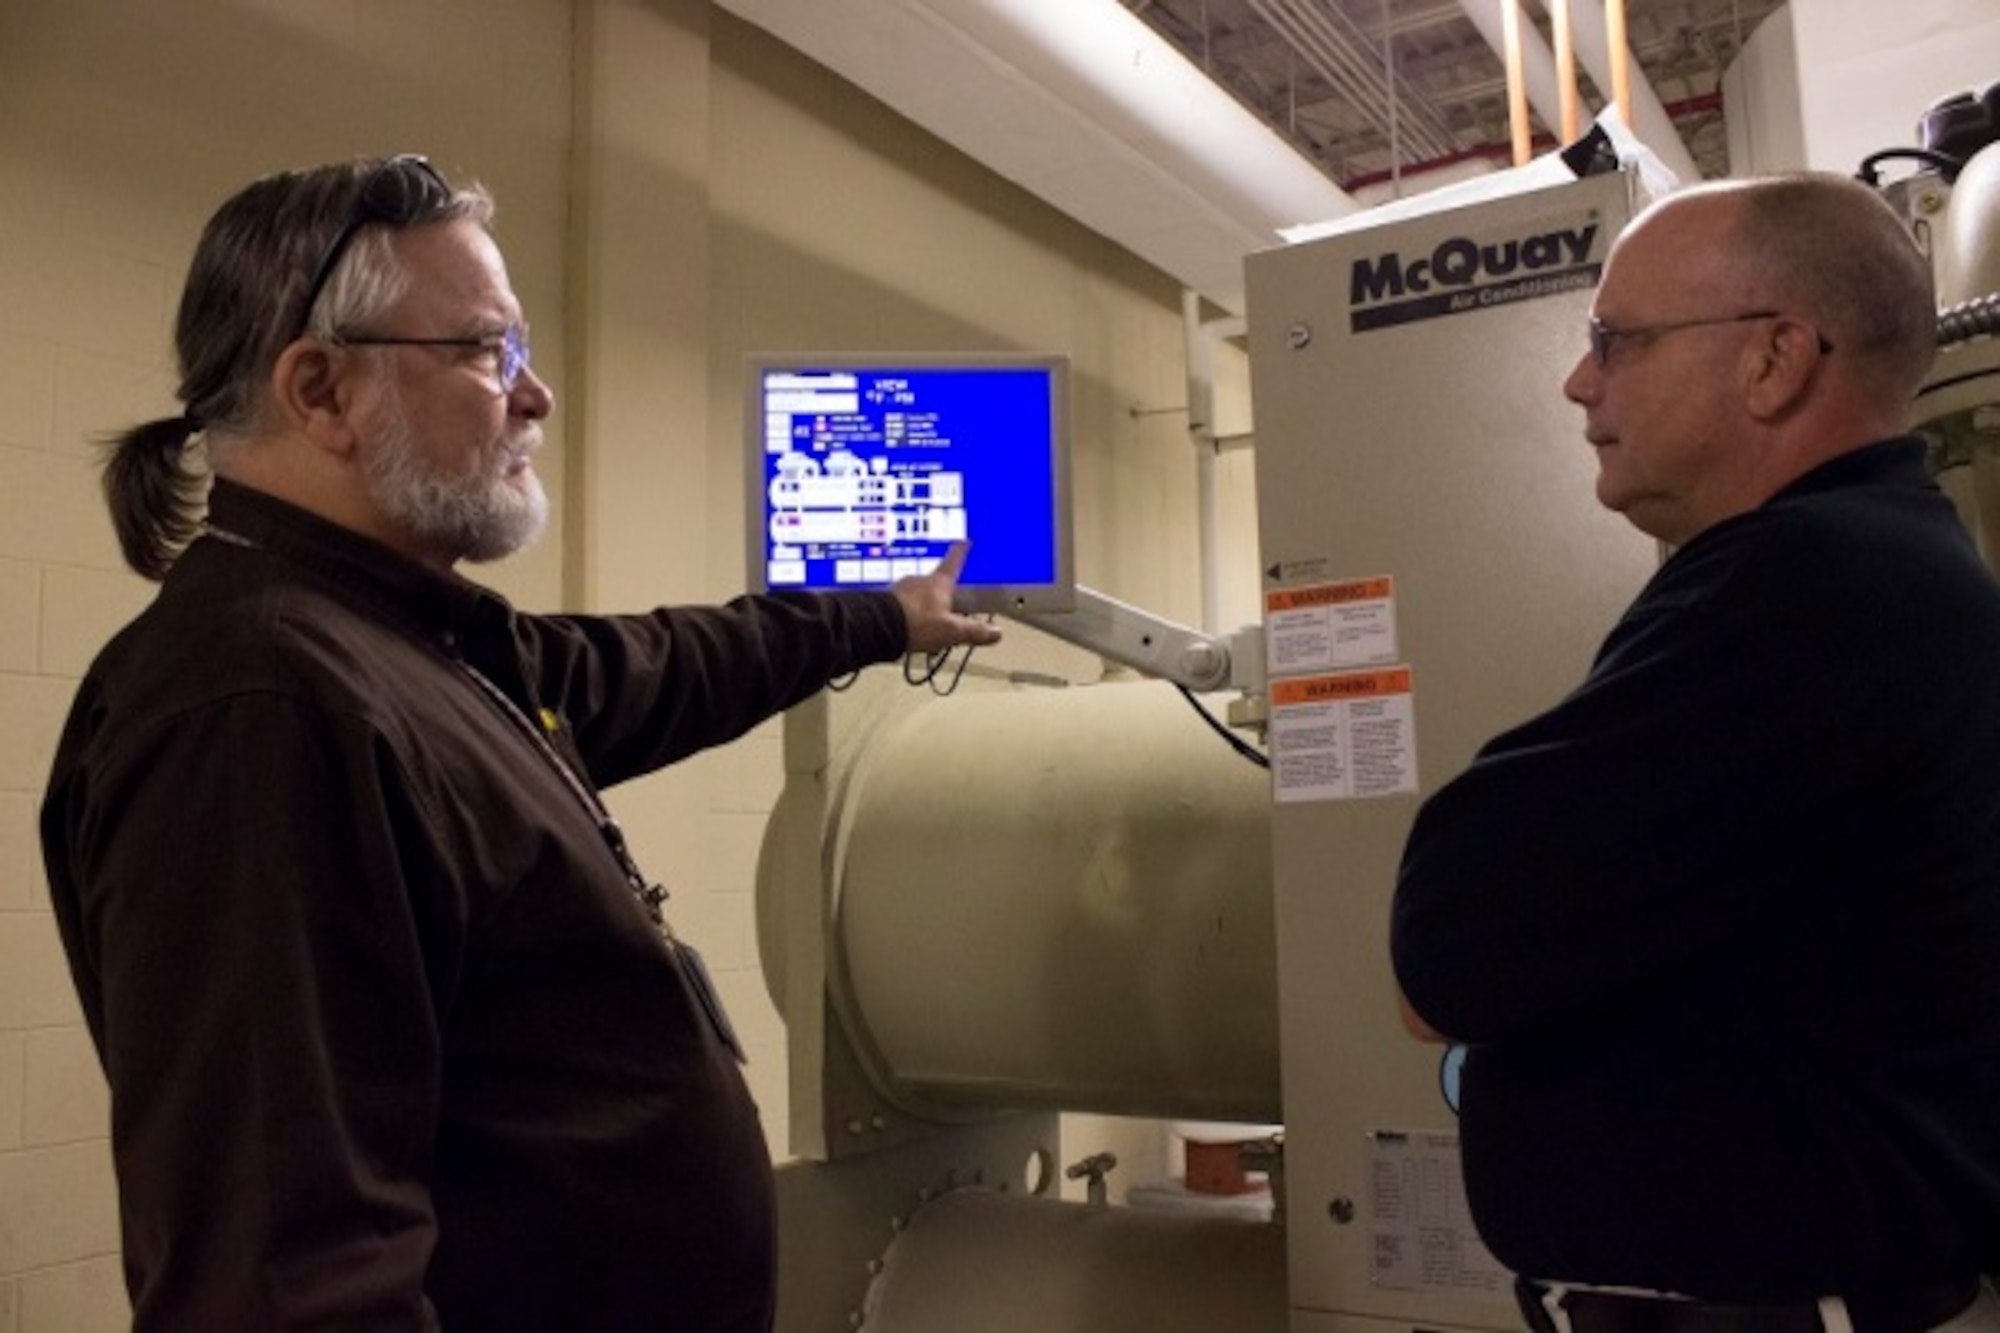 Jeff Fogarty, the HVAC equipment specialist at Civil Engineer Maintenance Inspection Repair Team at Tyndall Air Force Base, Florida, explains the status of the liquid cooled water chiller to Wayne Terrillion, facility manager at AFNORTH. (U.S. Air Force Photo/Susan Lawson/Released)